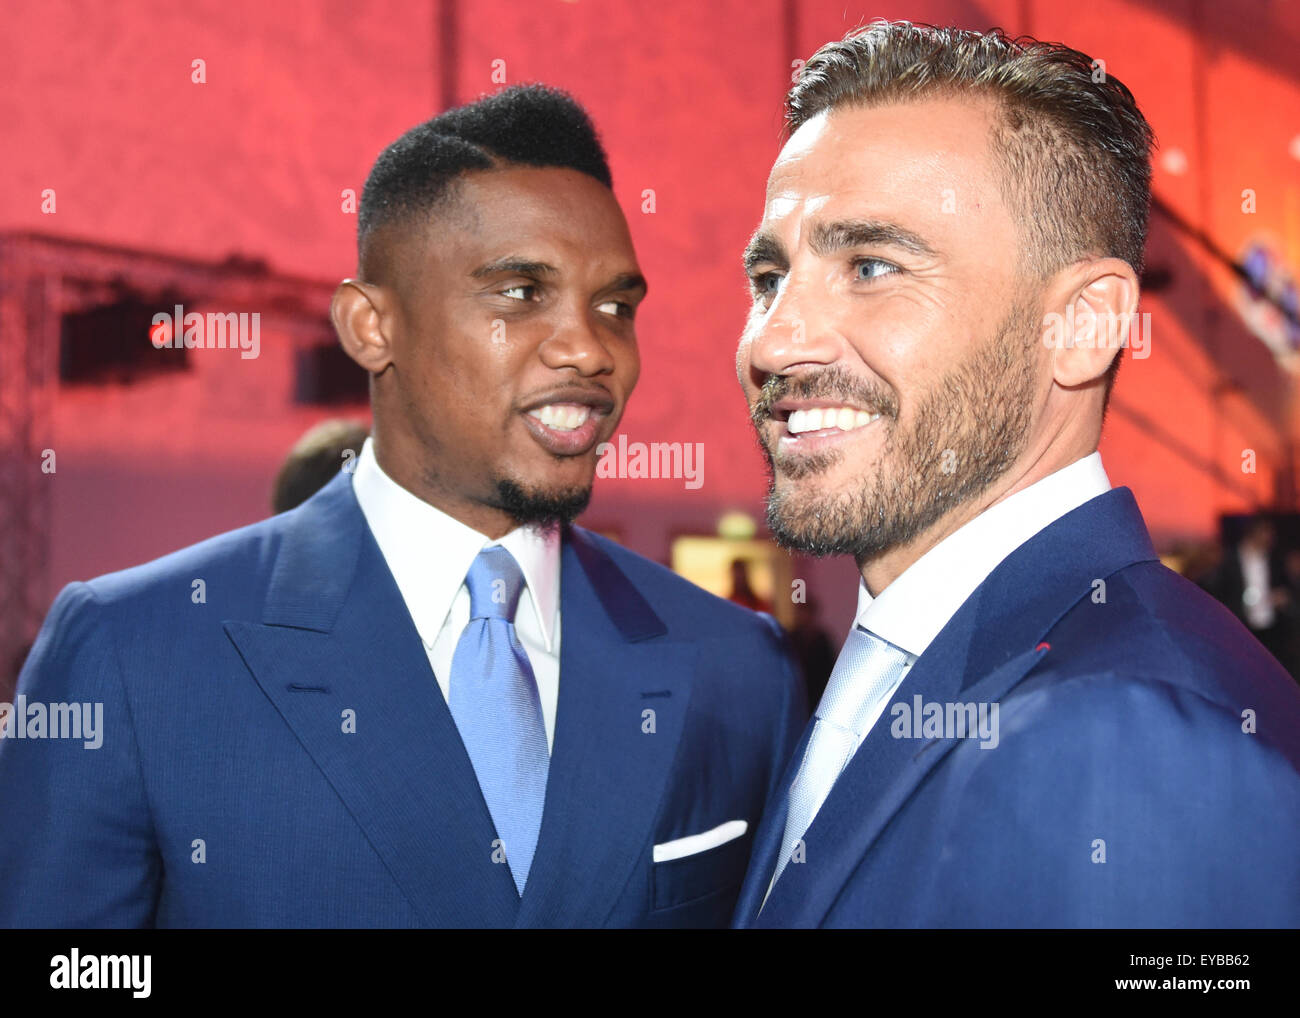 St Petersburg, Russia. 25th July, 2015. Samuel Eto'o (L) of Cameroon and former Italian soccer player Fabio Cannavaro attend the Preliminary Draw of the FIFA World Cup 2018 at Konstantinovsky palace outside St. Petersburg, Russia, 25 July 2015. St. Petersburg is one of the host cities of the FIFA World Cup 2018 in Russia which will take place from 14 June until 15 July 2018. Credit:  dpa picture alliance/Alamy Live News Stock Photo